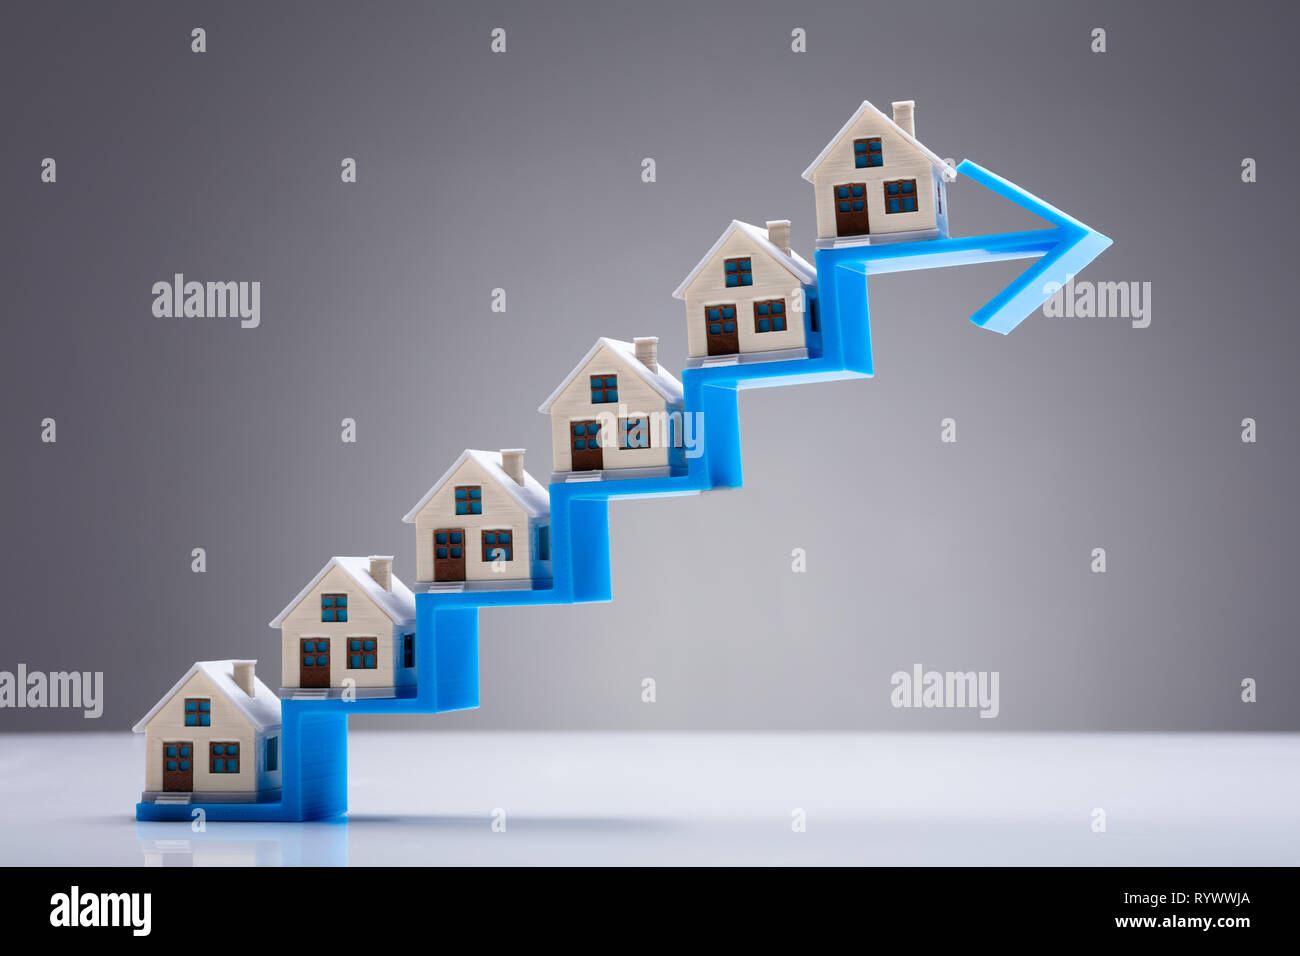 Small Model House On The Increasing Staircase Blue Arrow Over White Desk Stock Photo